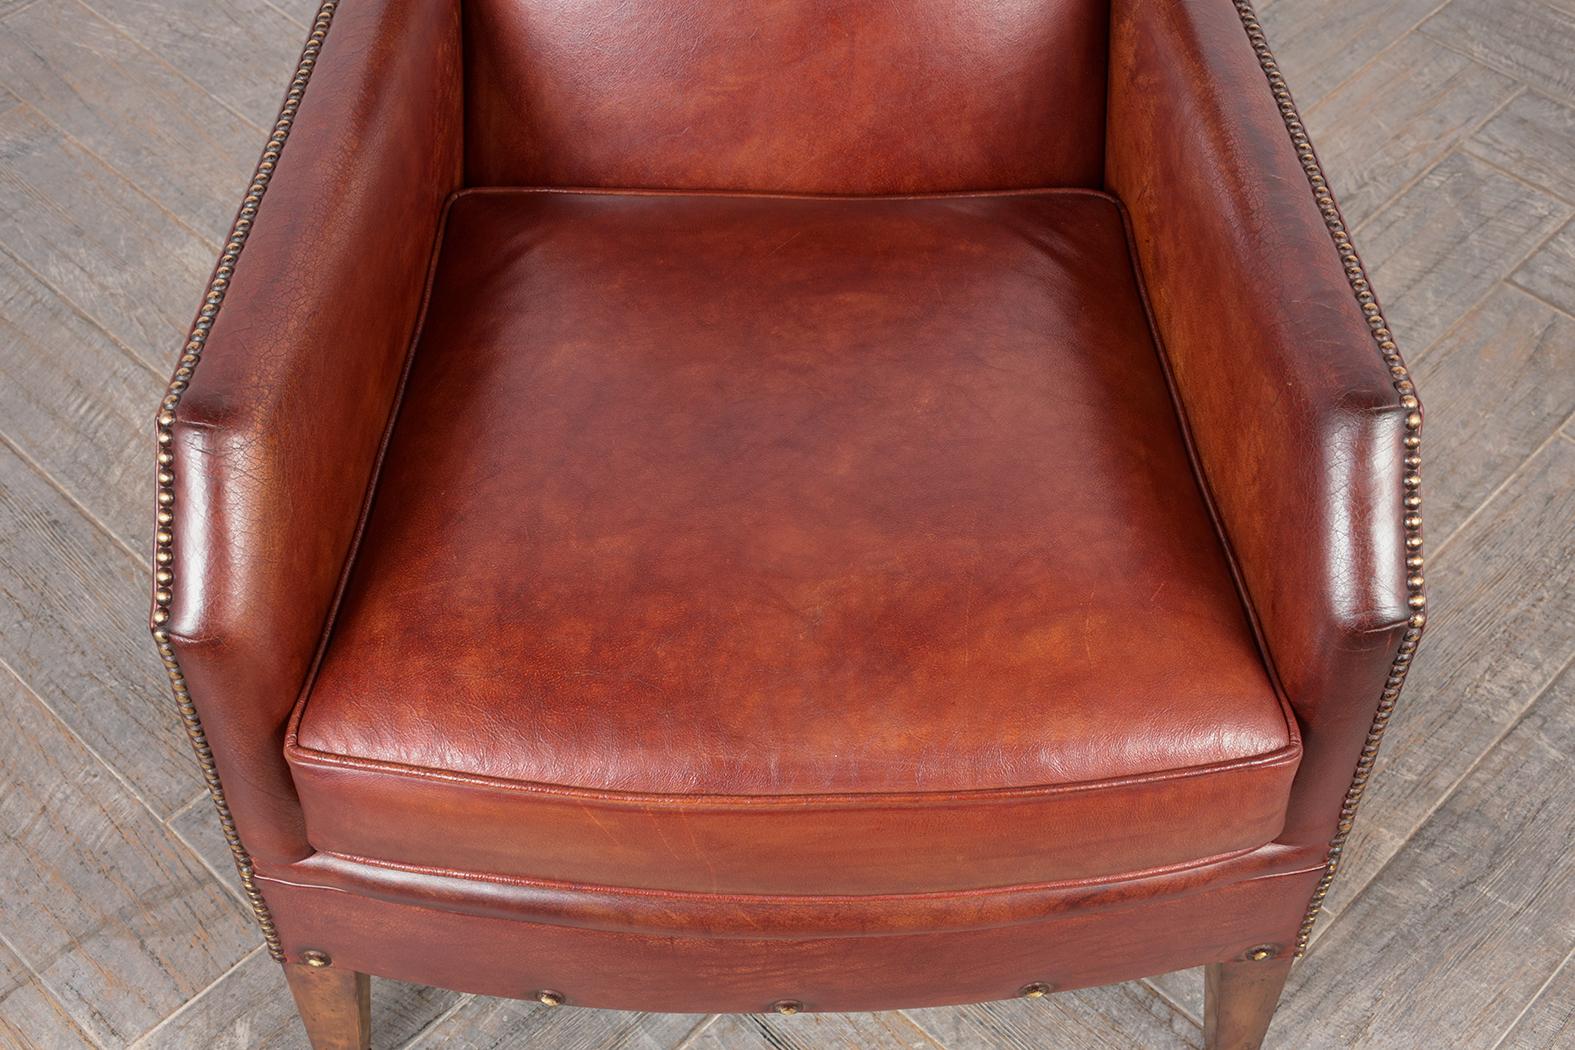 Dyed Pair of Art Deco Style Leather Club Chairs